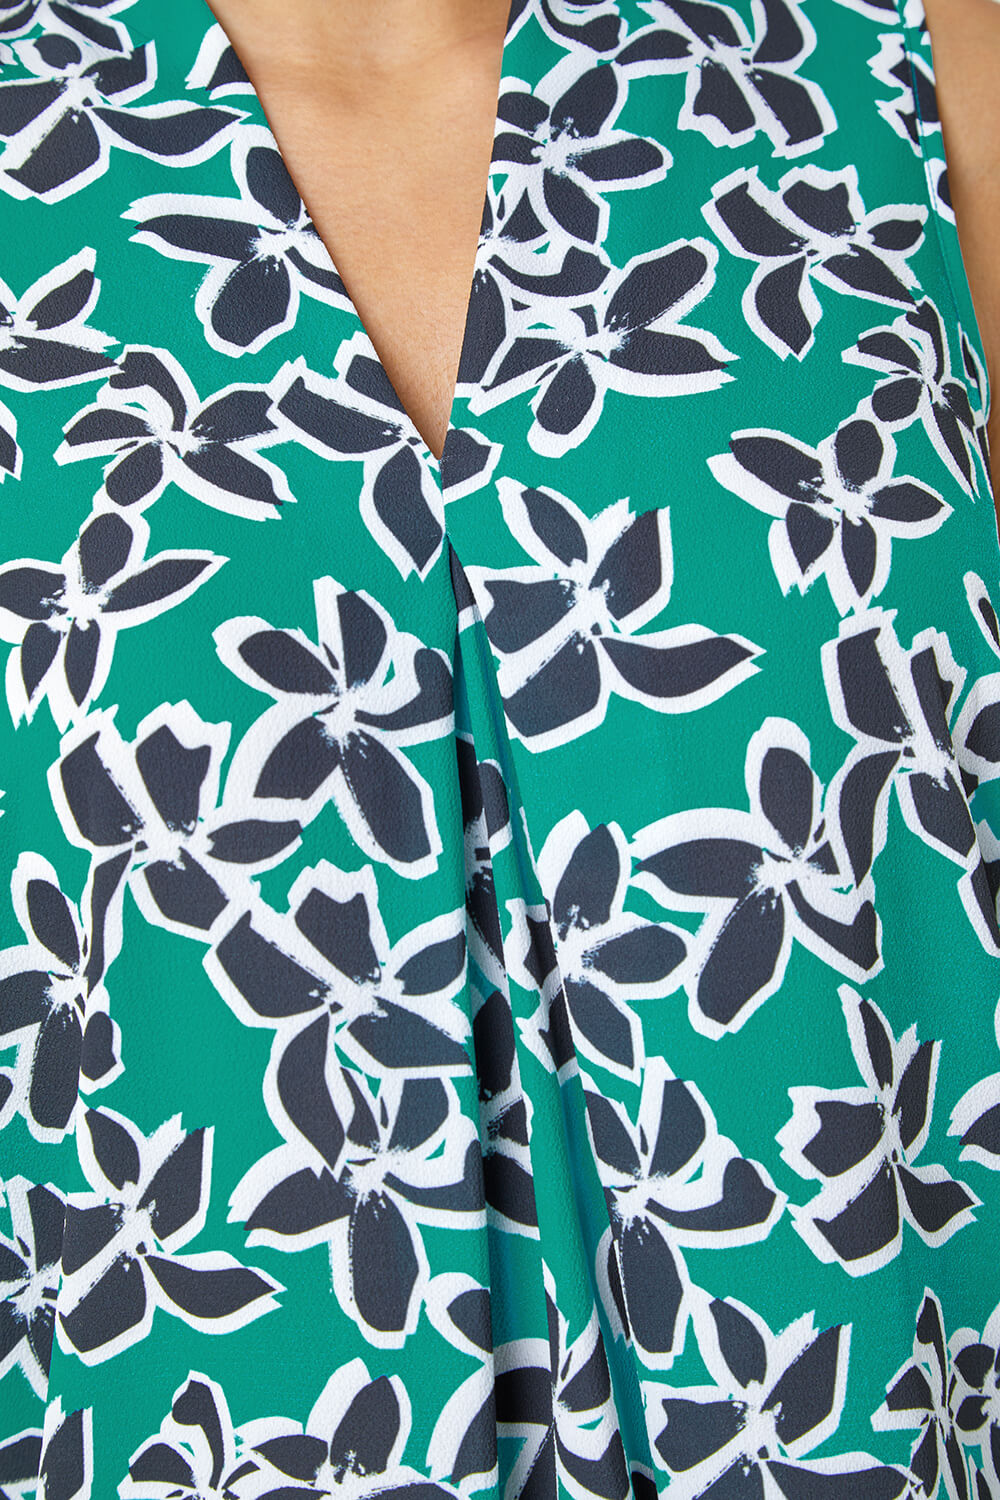 Green Sleeveless Floral Print Stretch Top, Image 5 of 5